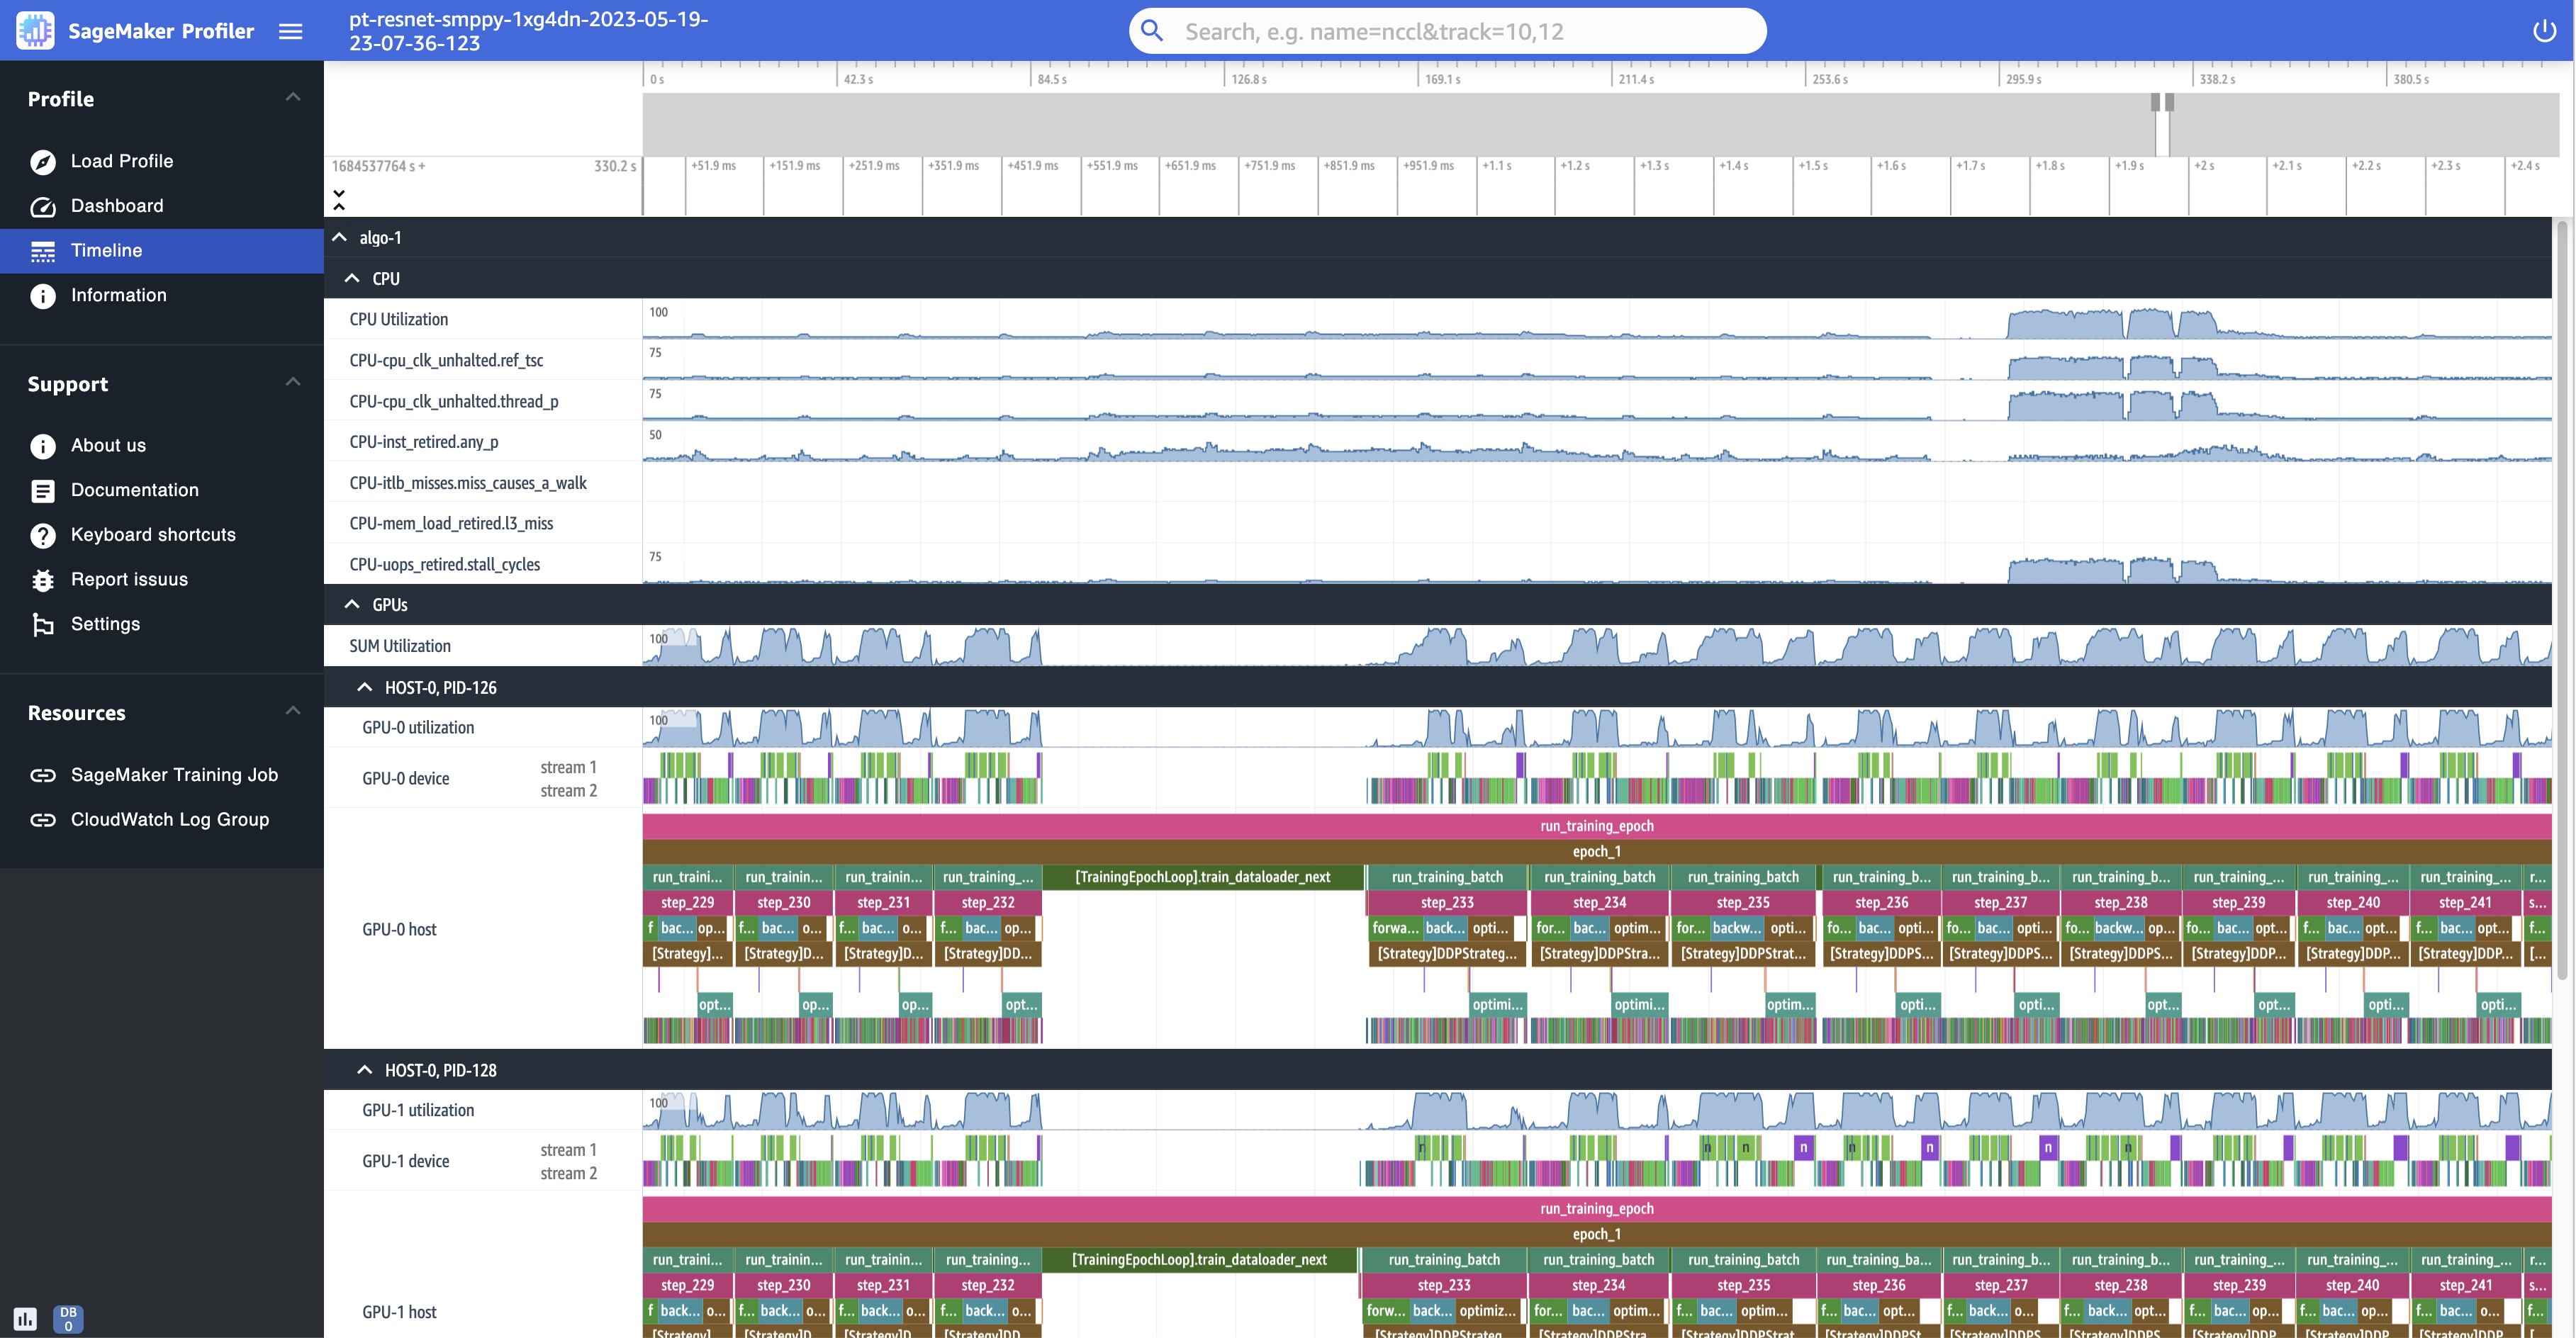 
                    A screenshot of the Timeline page in the SageMaker Profiler UI,
                        which visualizes the profile of a sample training job.
                